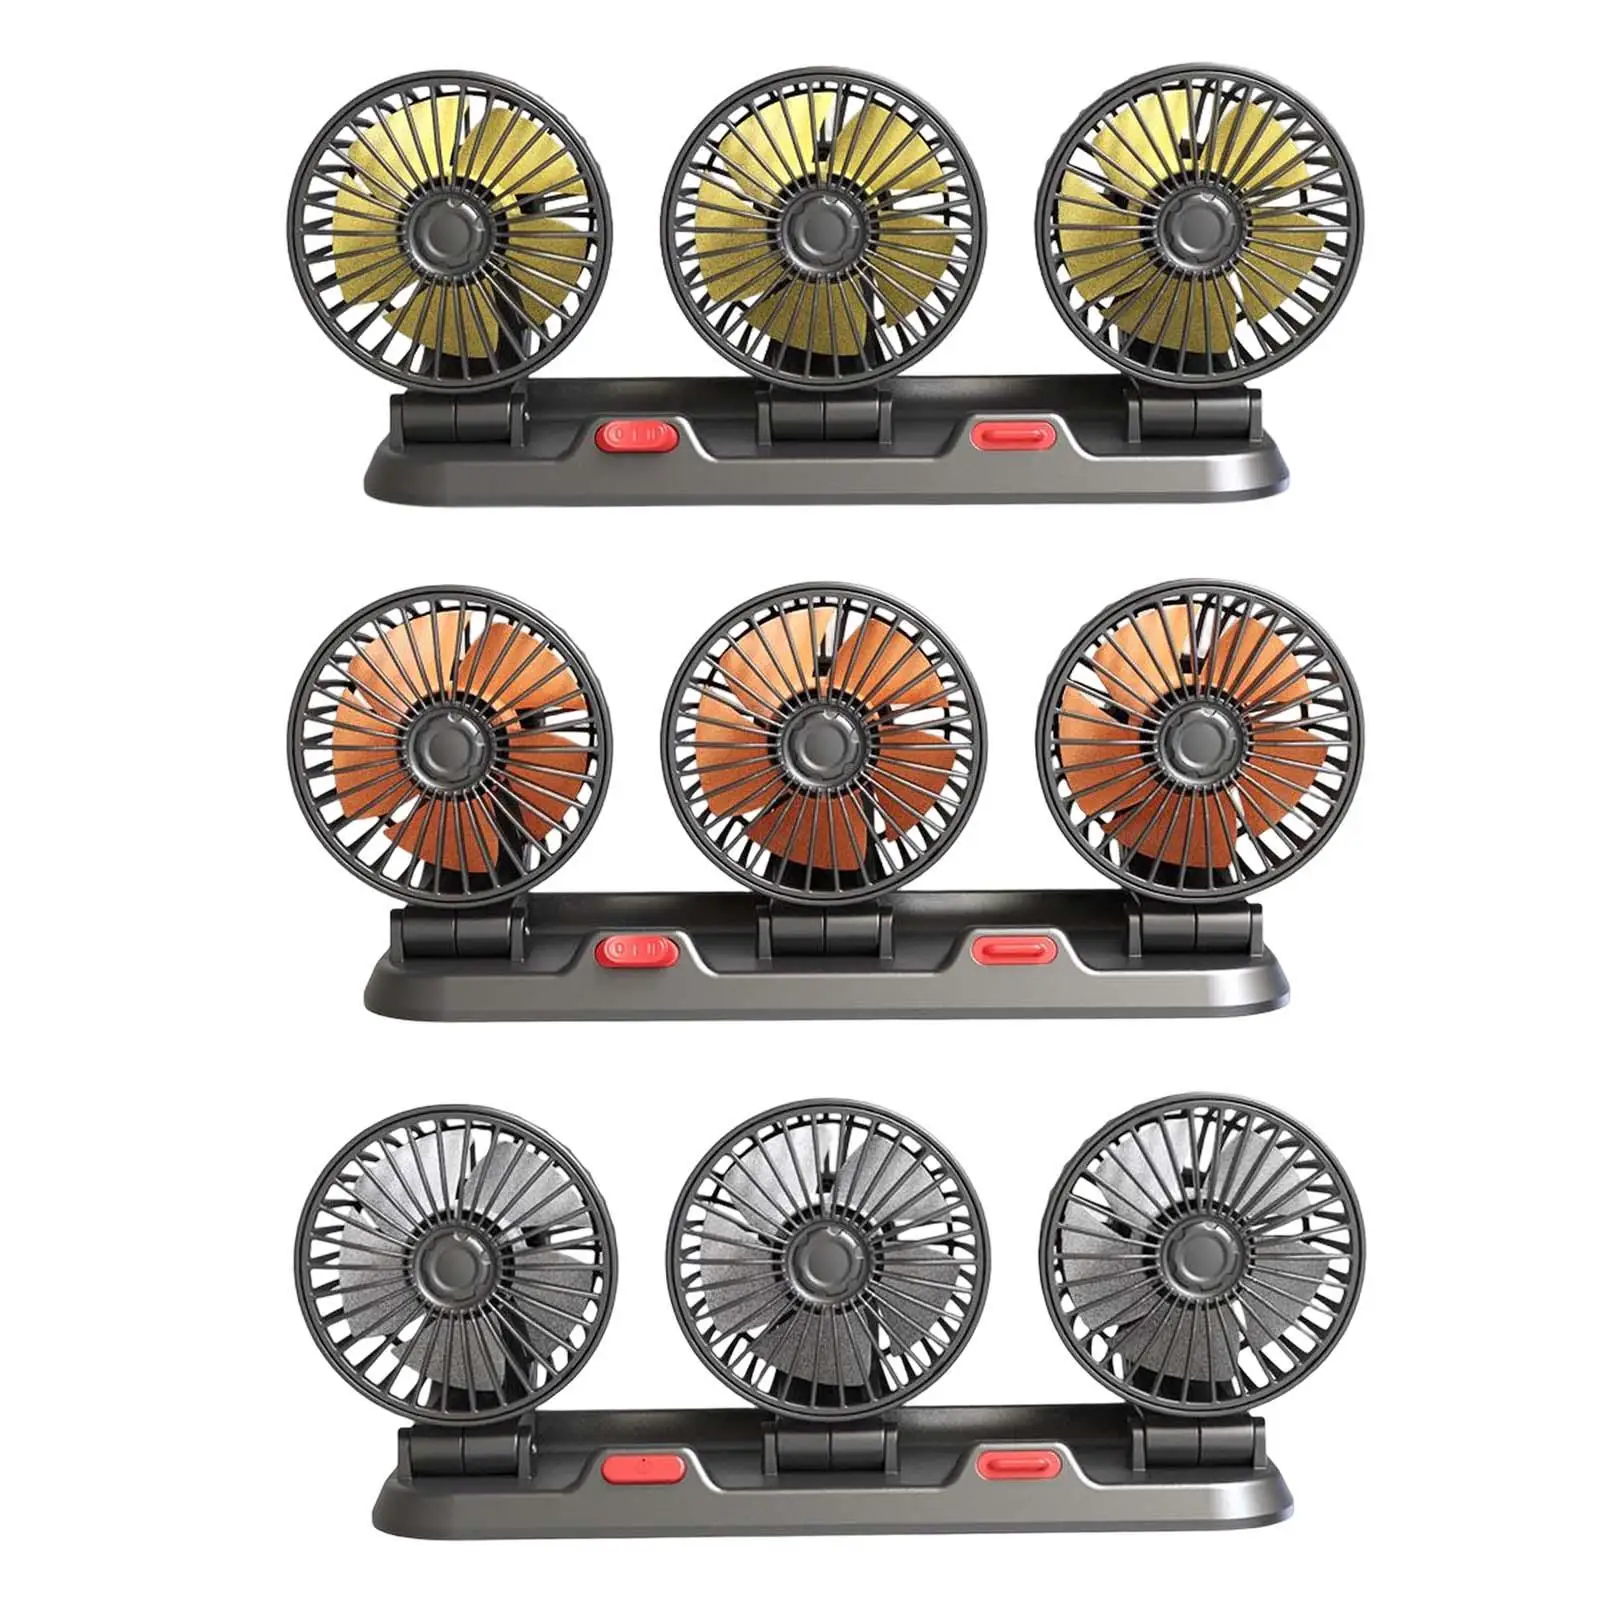 

Car Air Circulation 360 Rotation 3 Head Powerful Auto Car Fans Personal Cooling Vehicle Fan Quiet for Bus Van Truck